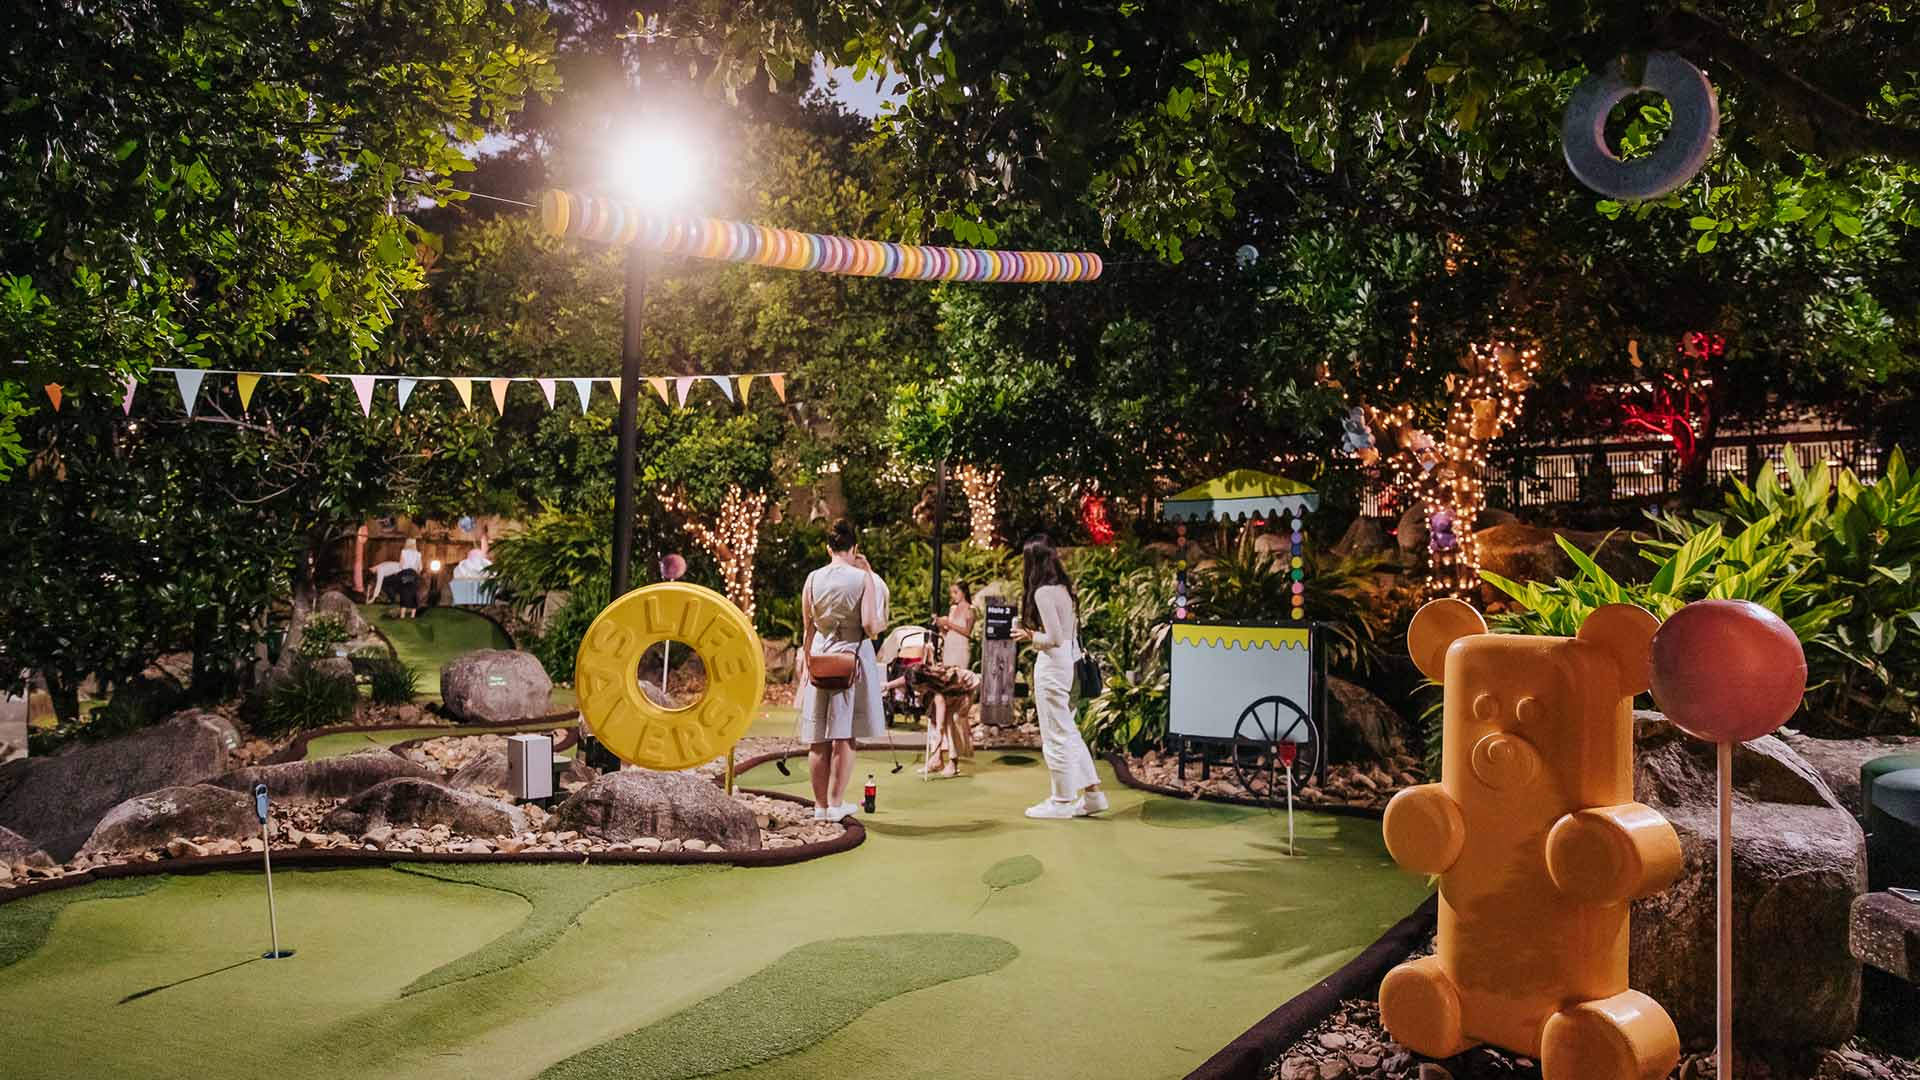 Sweet News: Victoria Park Is Bringing Back Its Candy-Themed Mini Golf Course This Easter